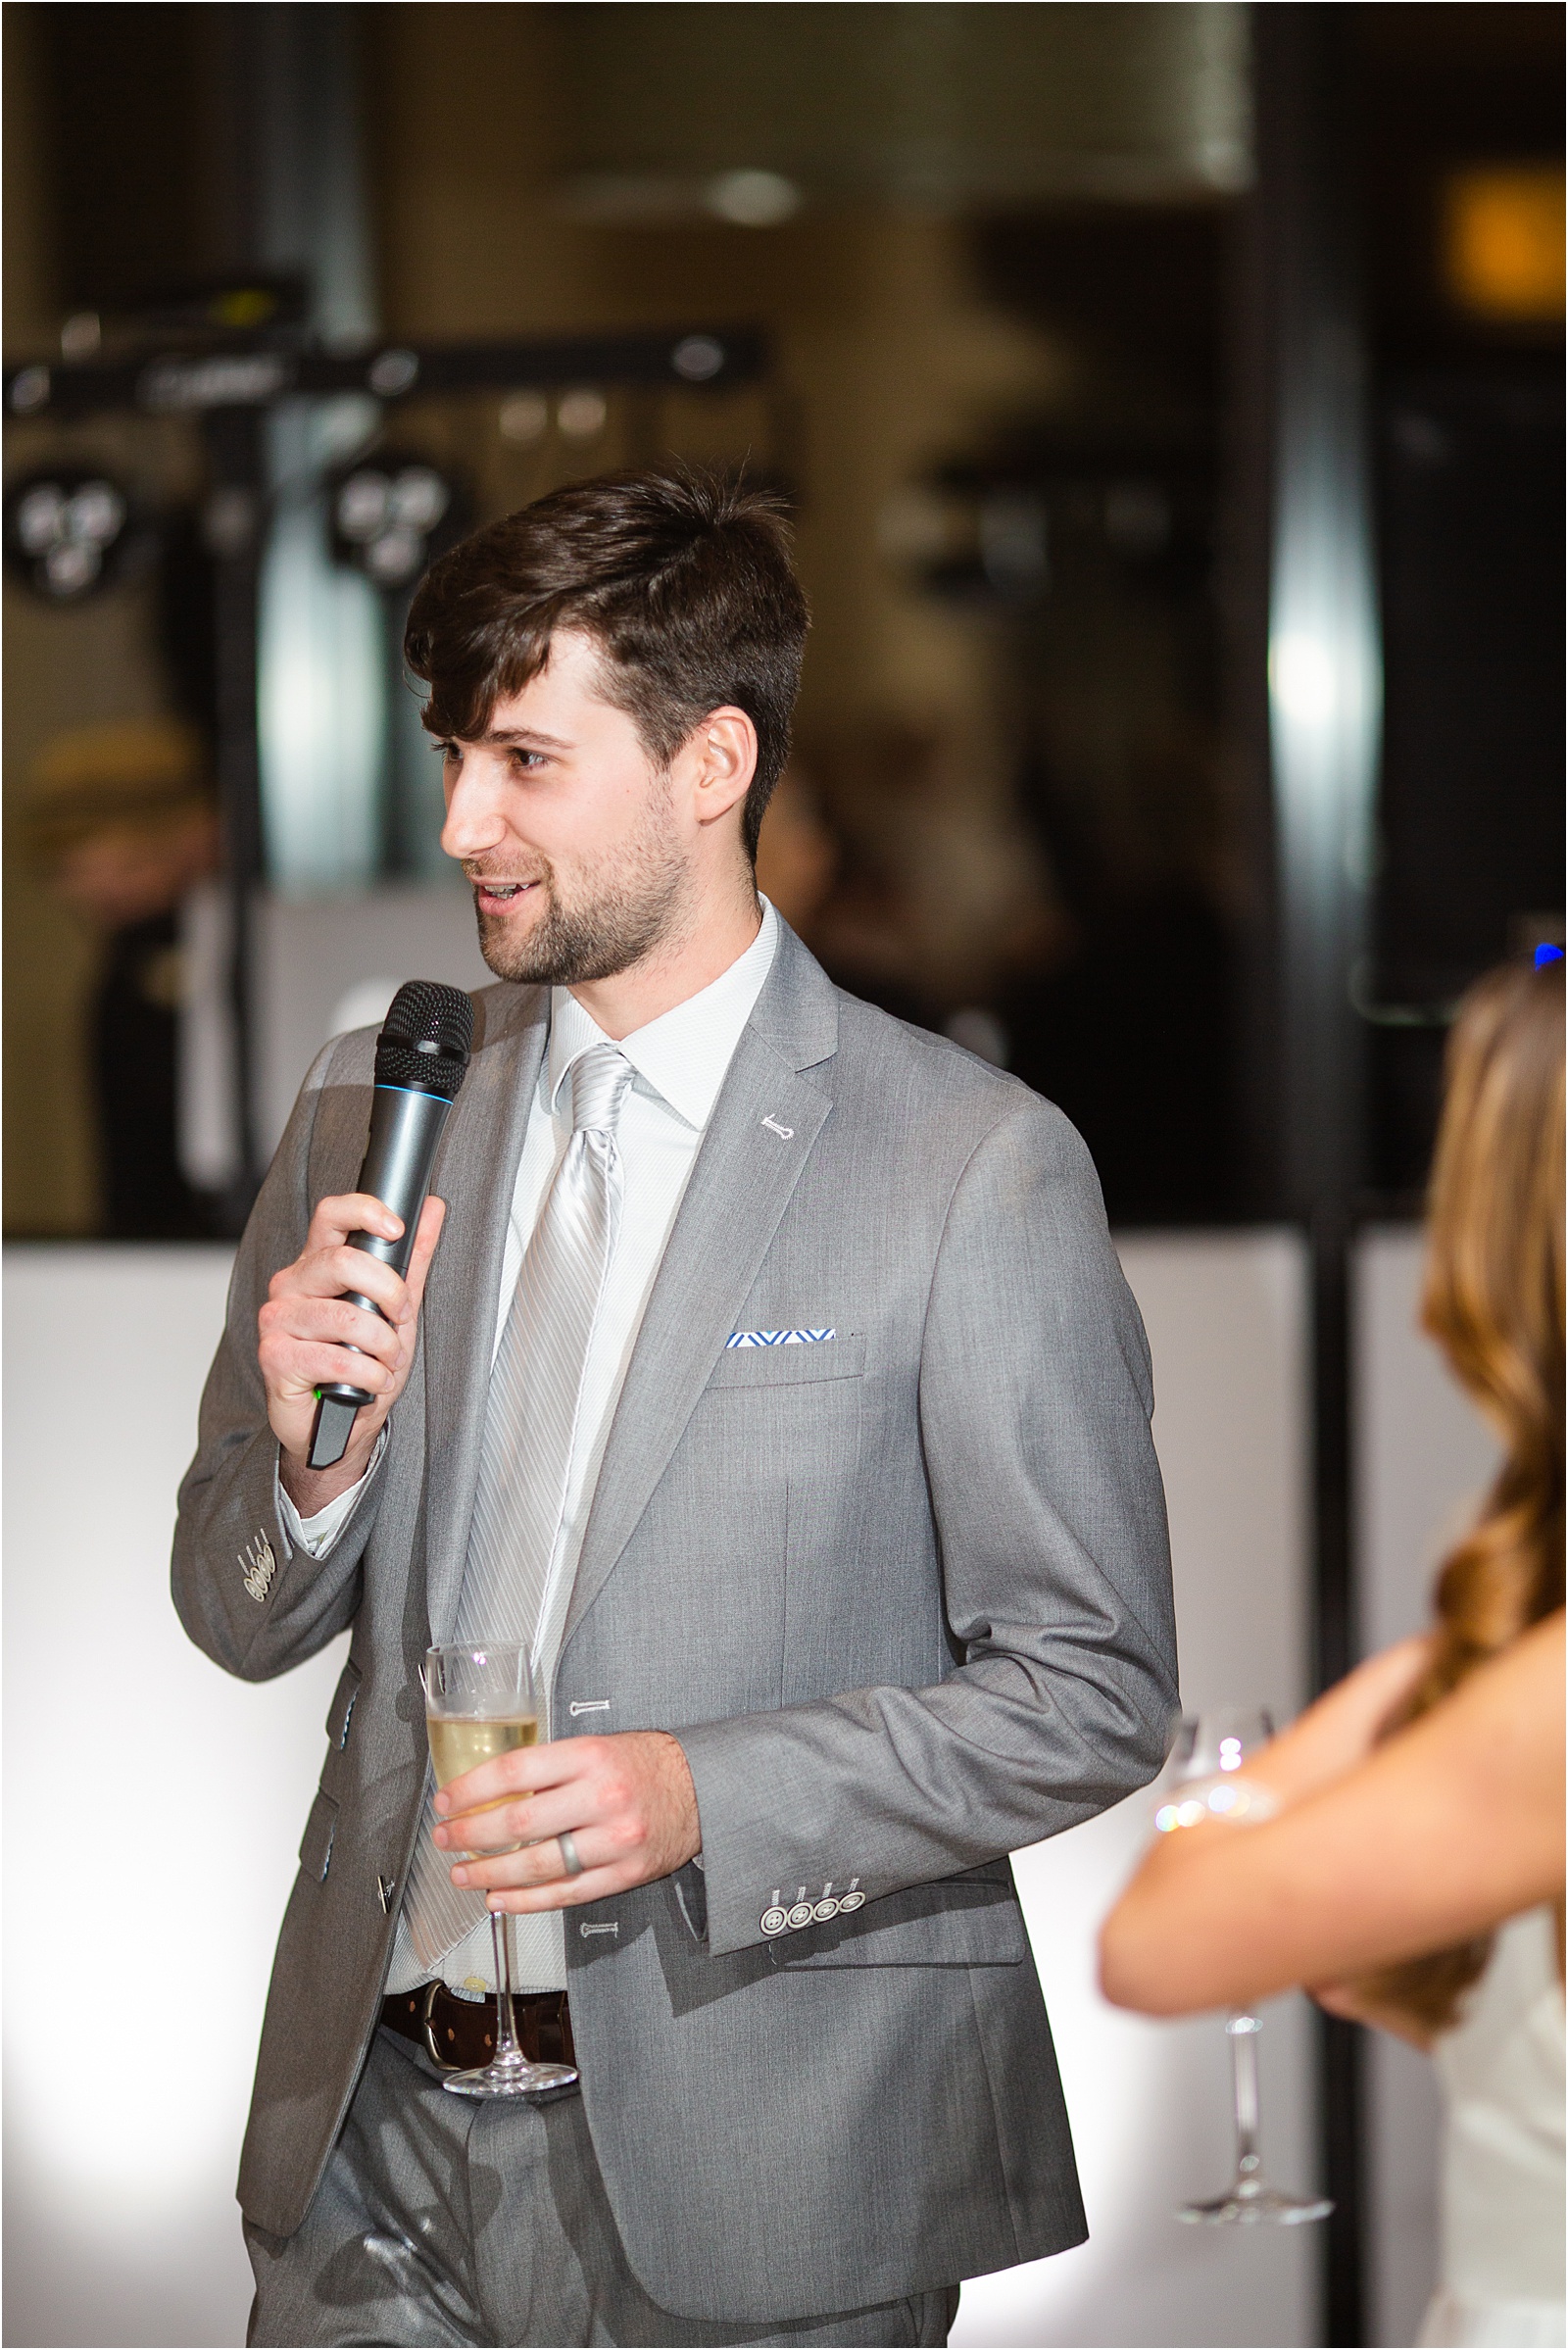 groom gives speech at wedding reception holding mic